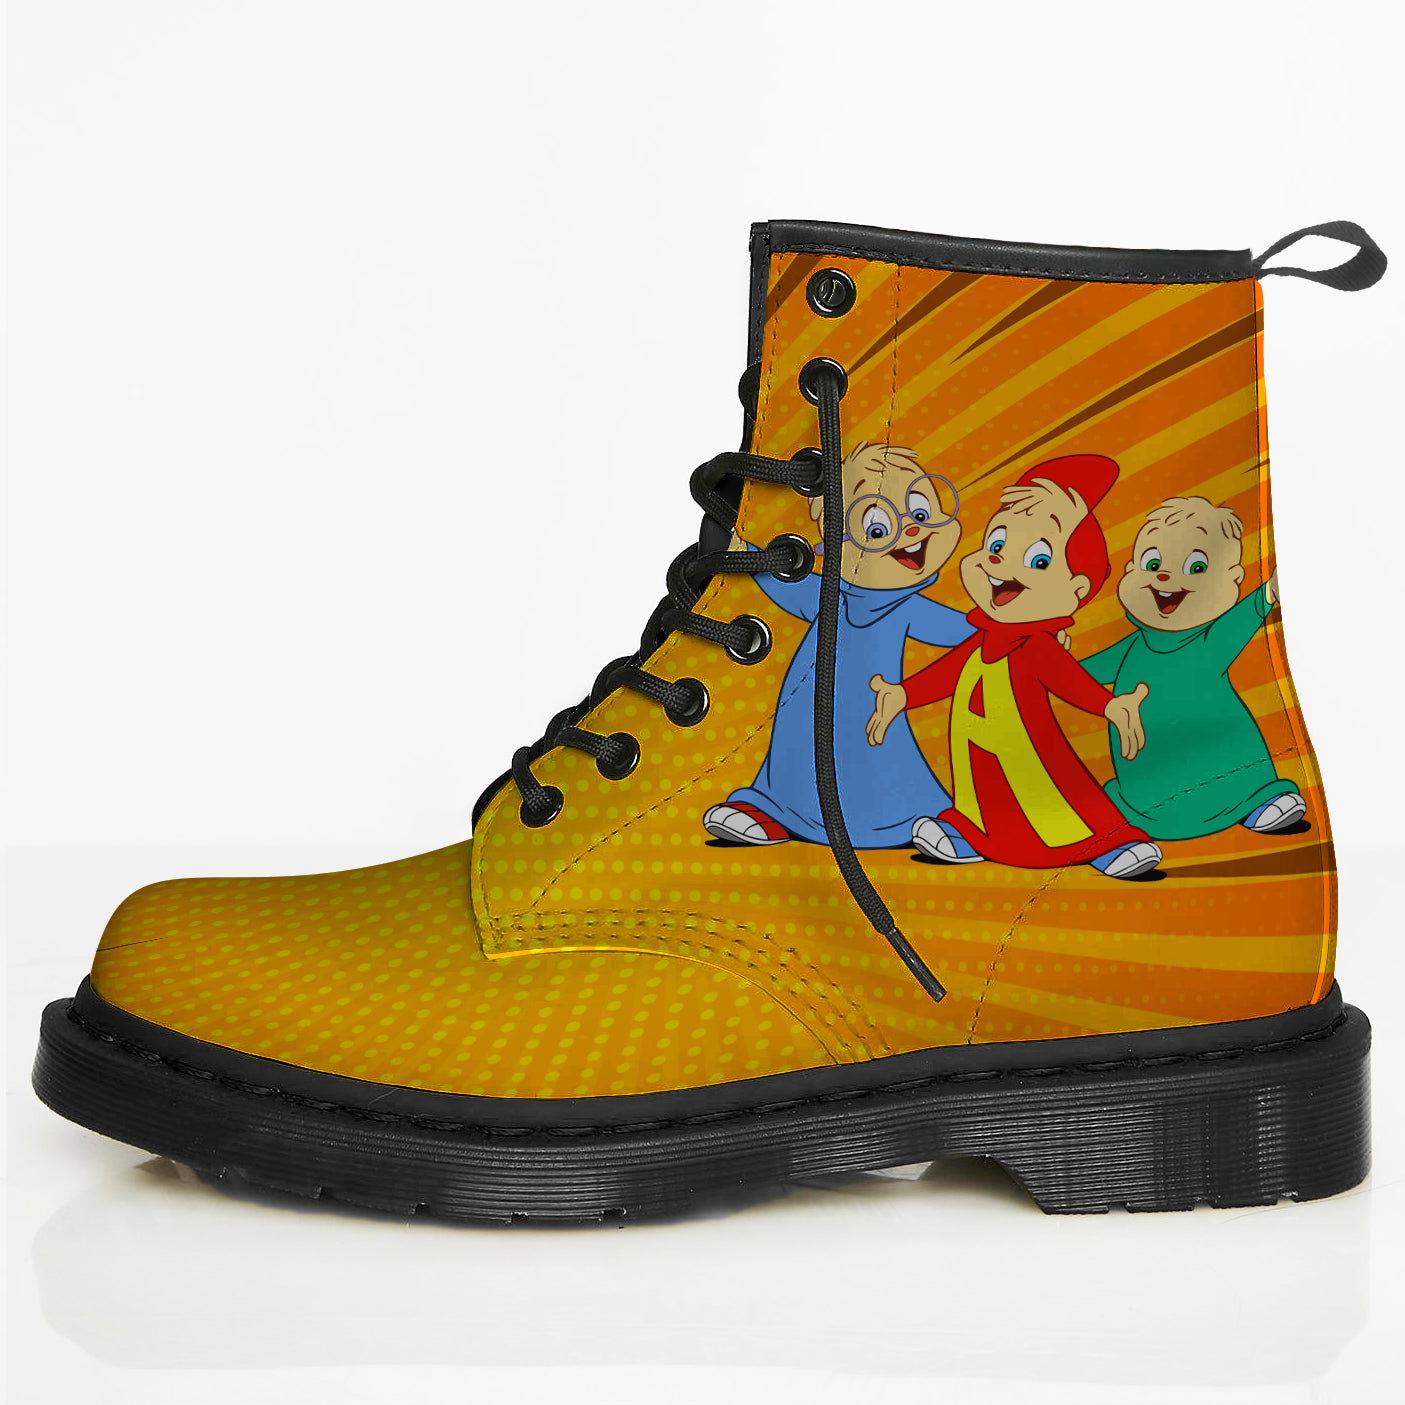 Alvin and the Chipmunks Boots